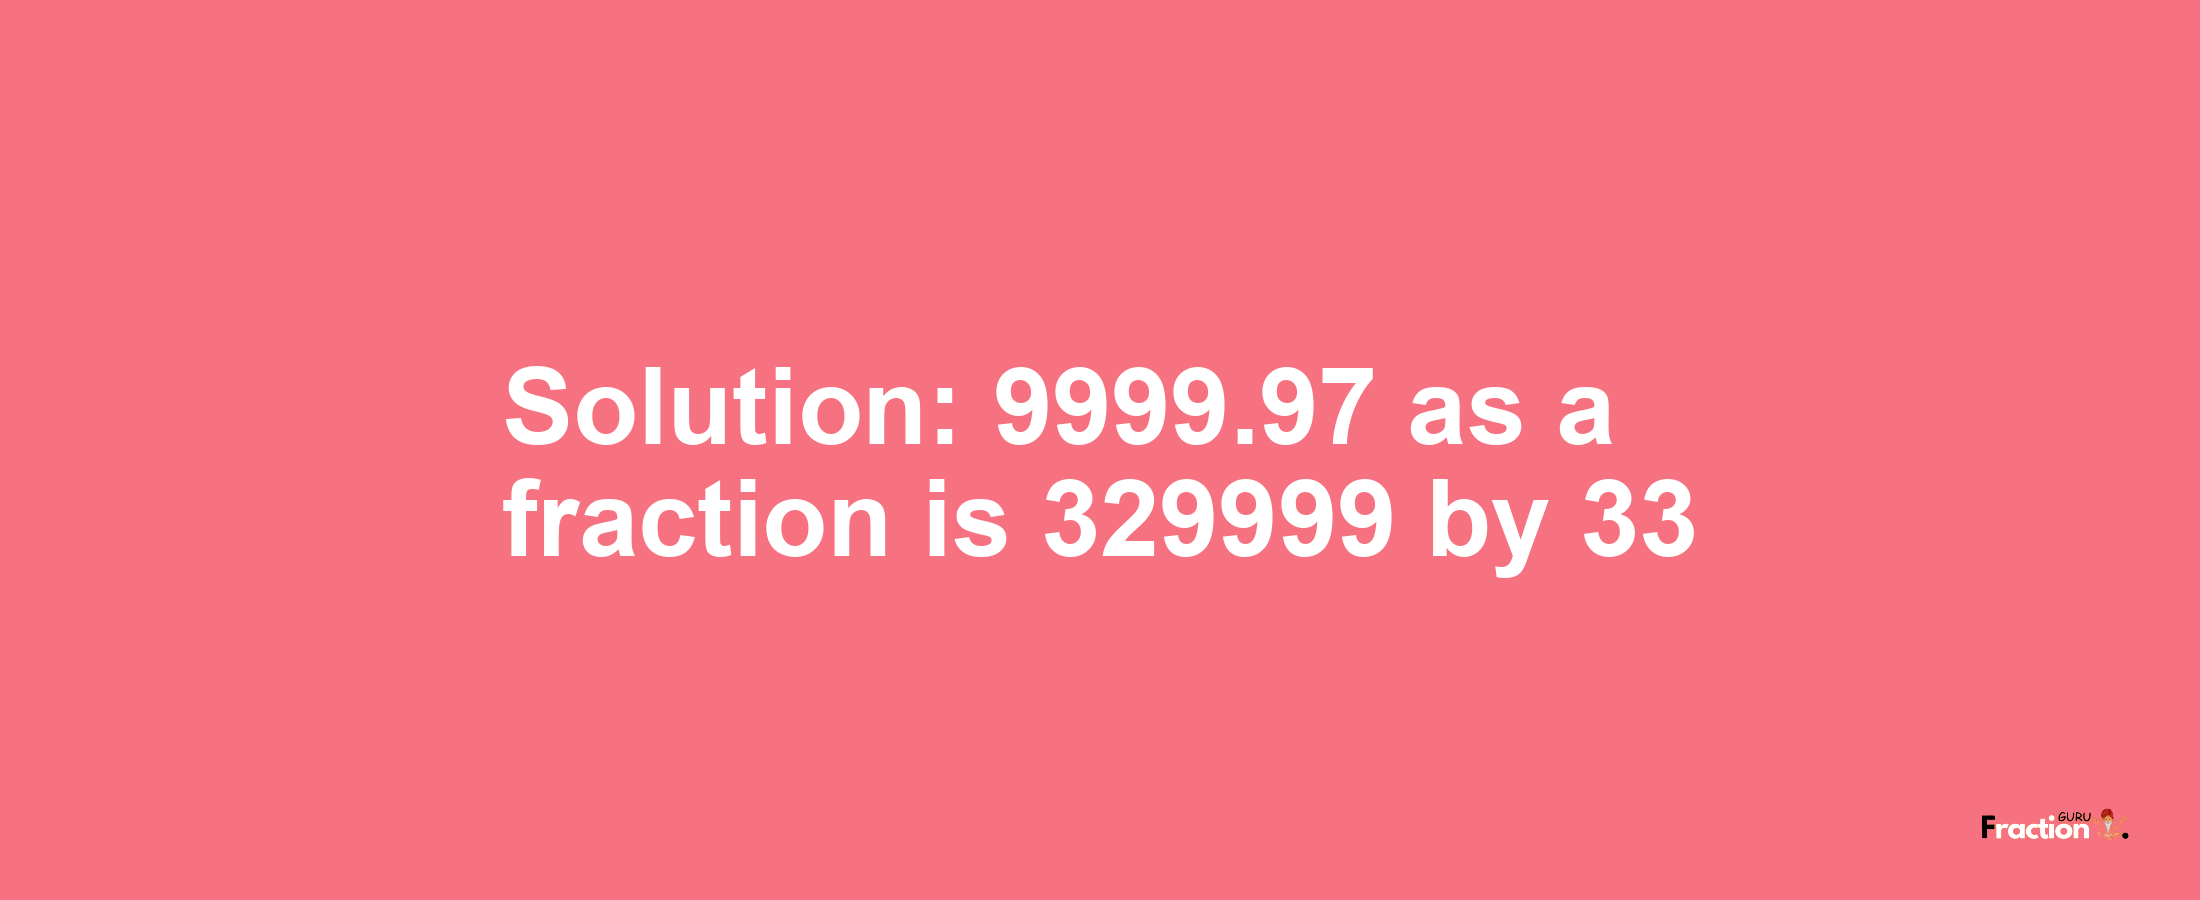 Solution:9999.97 as a fraction is 329999/33